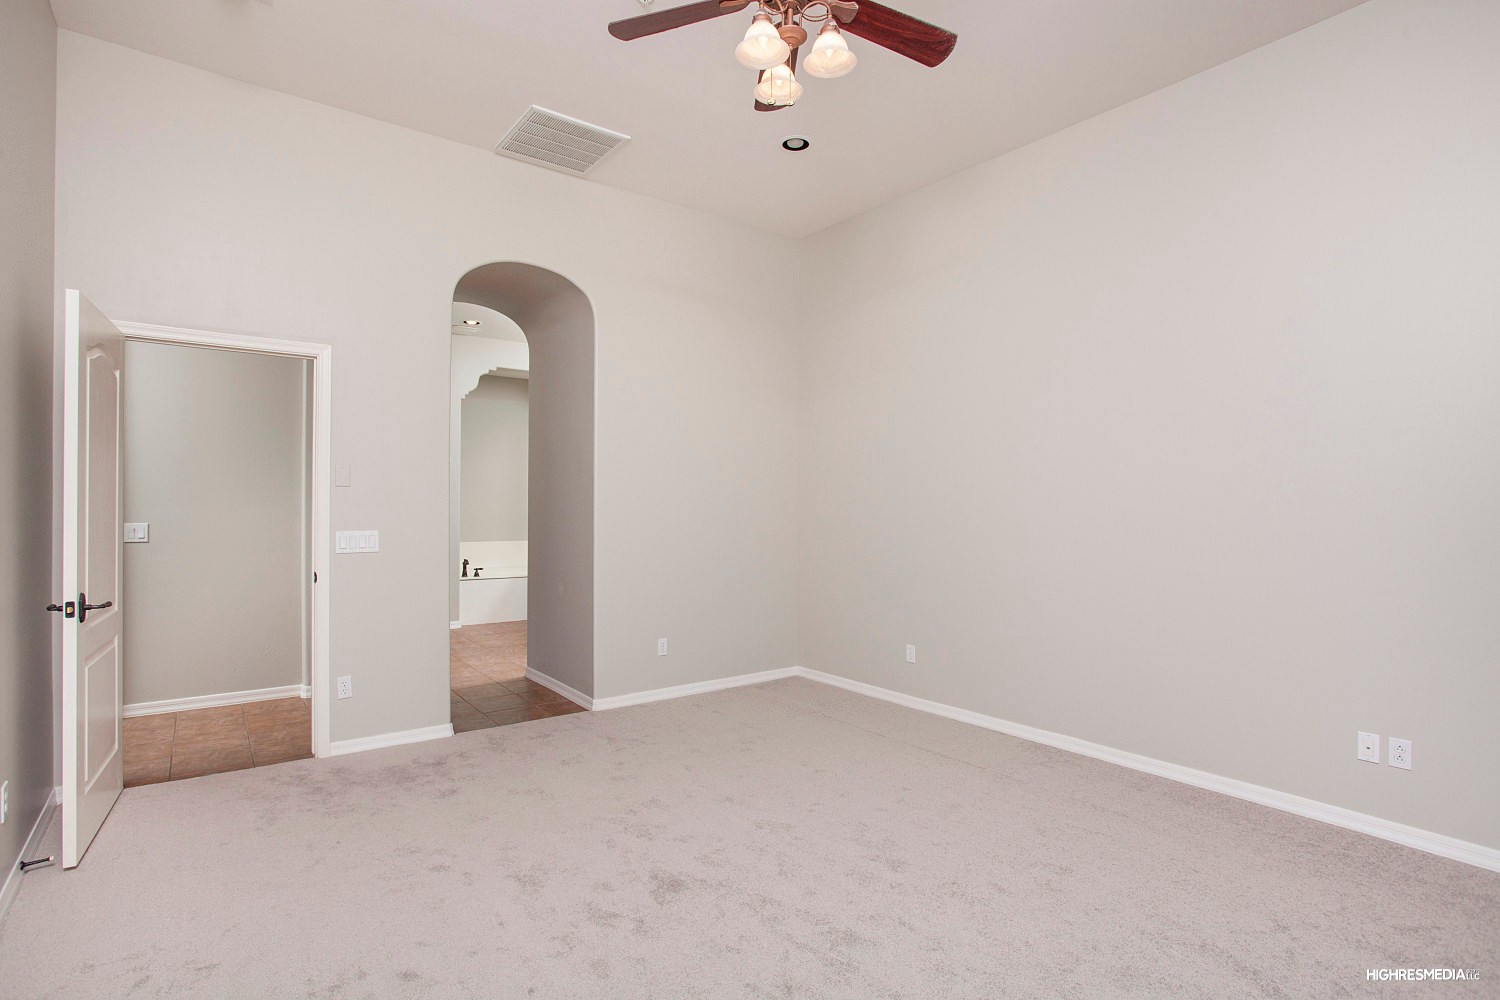 Spacious owner's suite at this Scottsdale townhome for sale in Market Street at DC Ranch located at 20704 N 90th Pl #1005 Scottsdale, AZ 85255 listed by Don Matheson at The Matheson Team